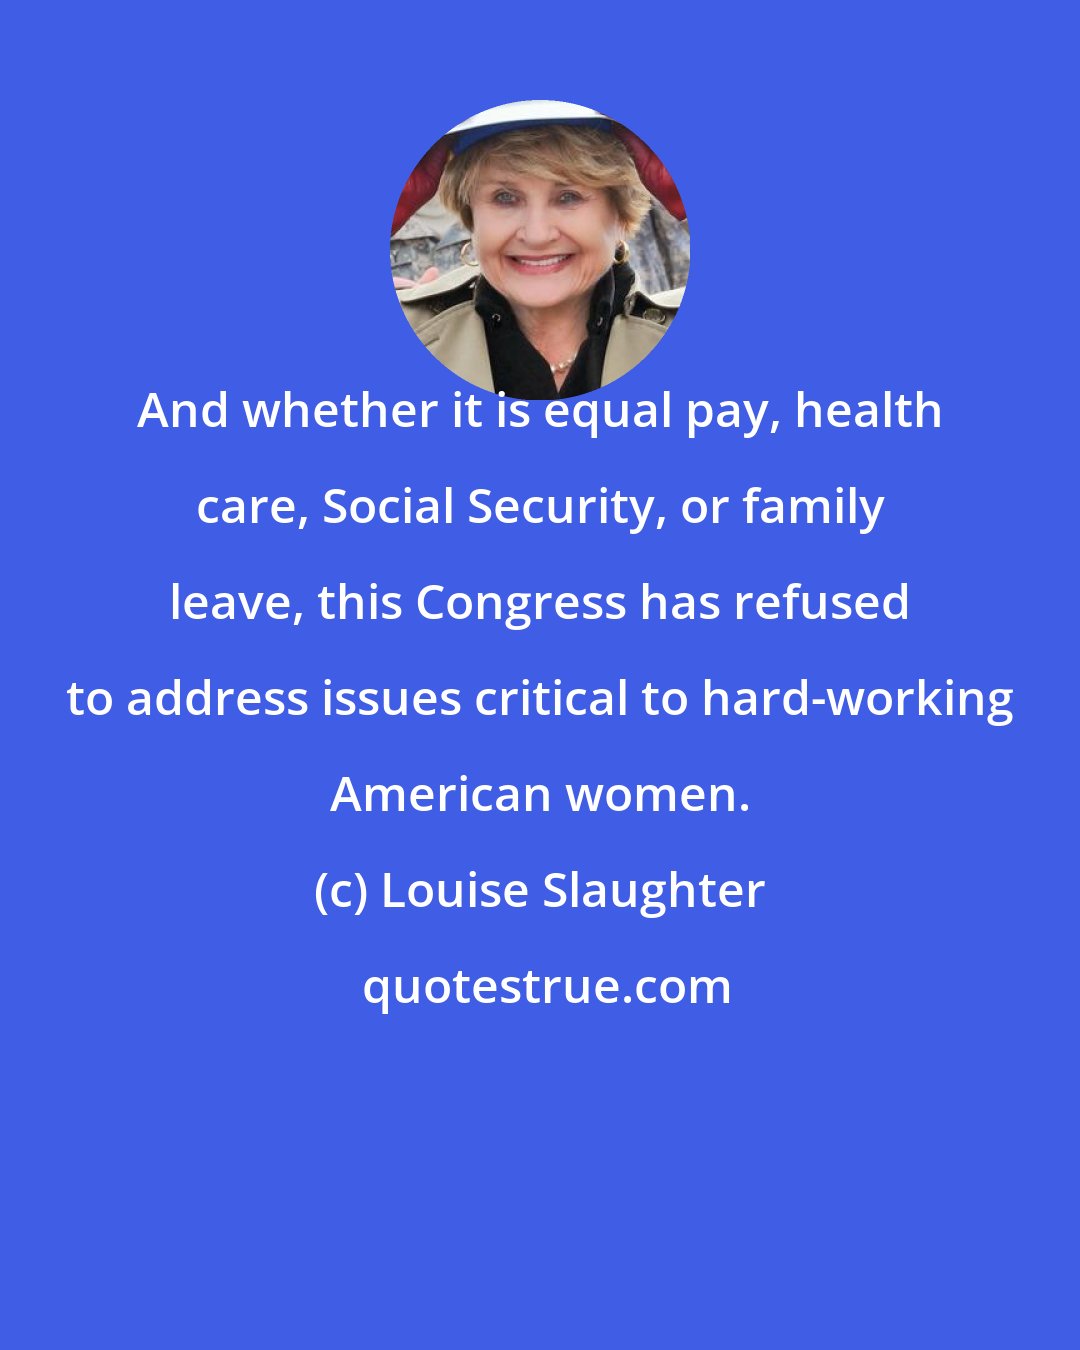 Louise Slaughter: And whether it is equal pay, health care, Social Security, or family leave, this Congress has refused to address issues critical to hard-working American women.